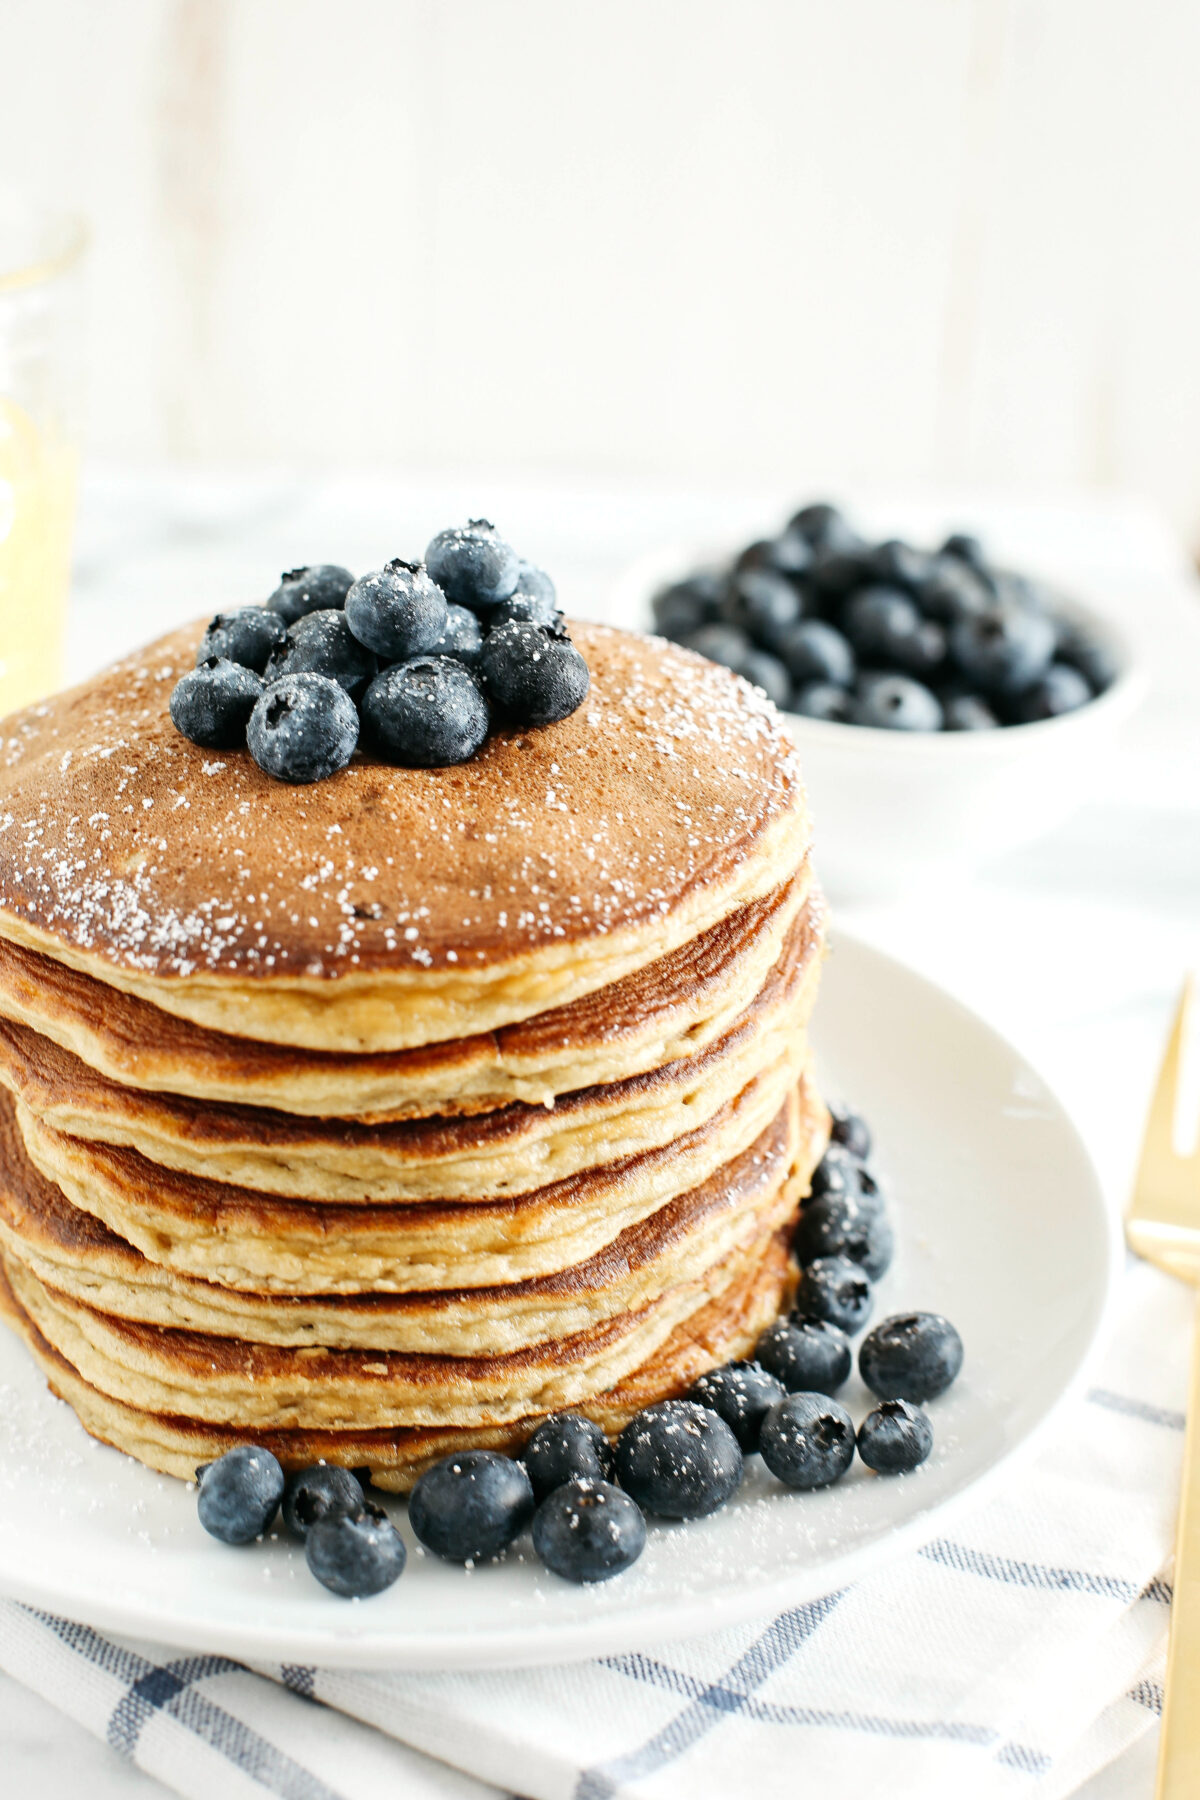 Start your morning with these fluffy blueberry banana pancakes that are grain-free, gluten-free and refined sugar-free made with almond flour for an easy delicious breakfast!